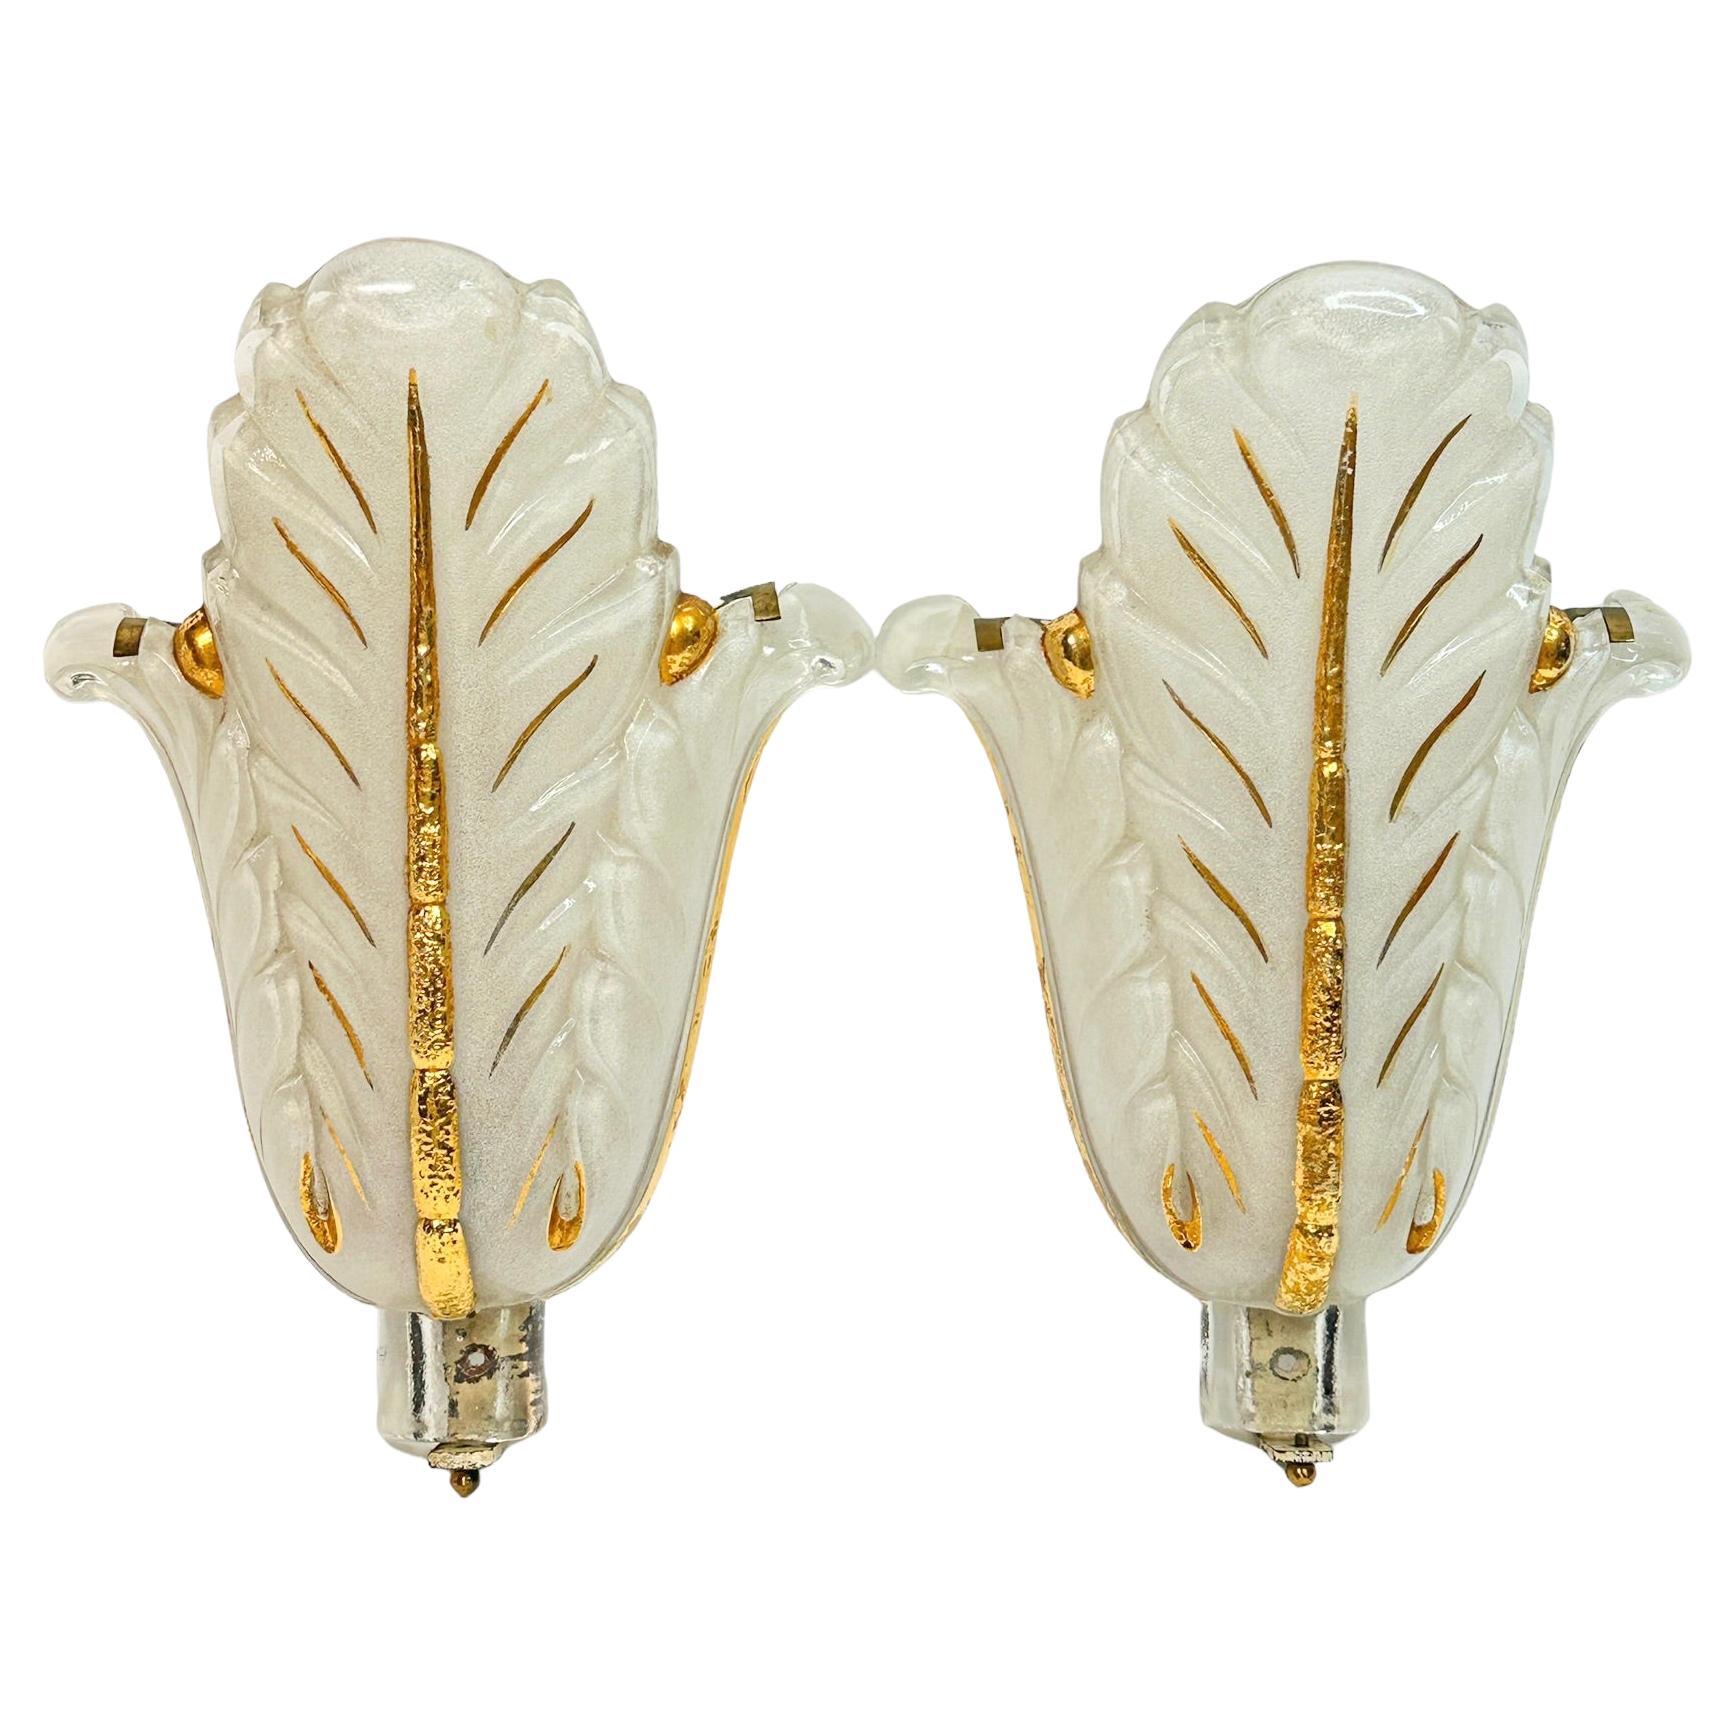 Pair of Jean Gauthier Art Deco Glass Sconces 1930s French For Sale